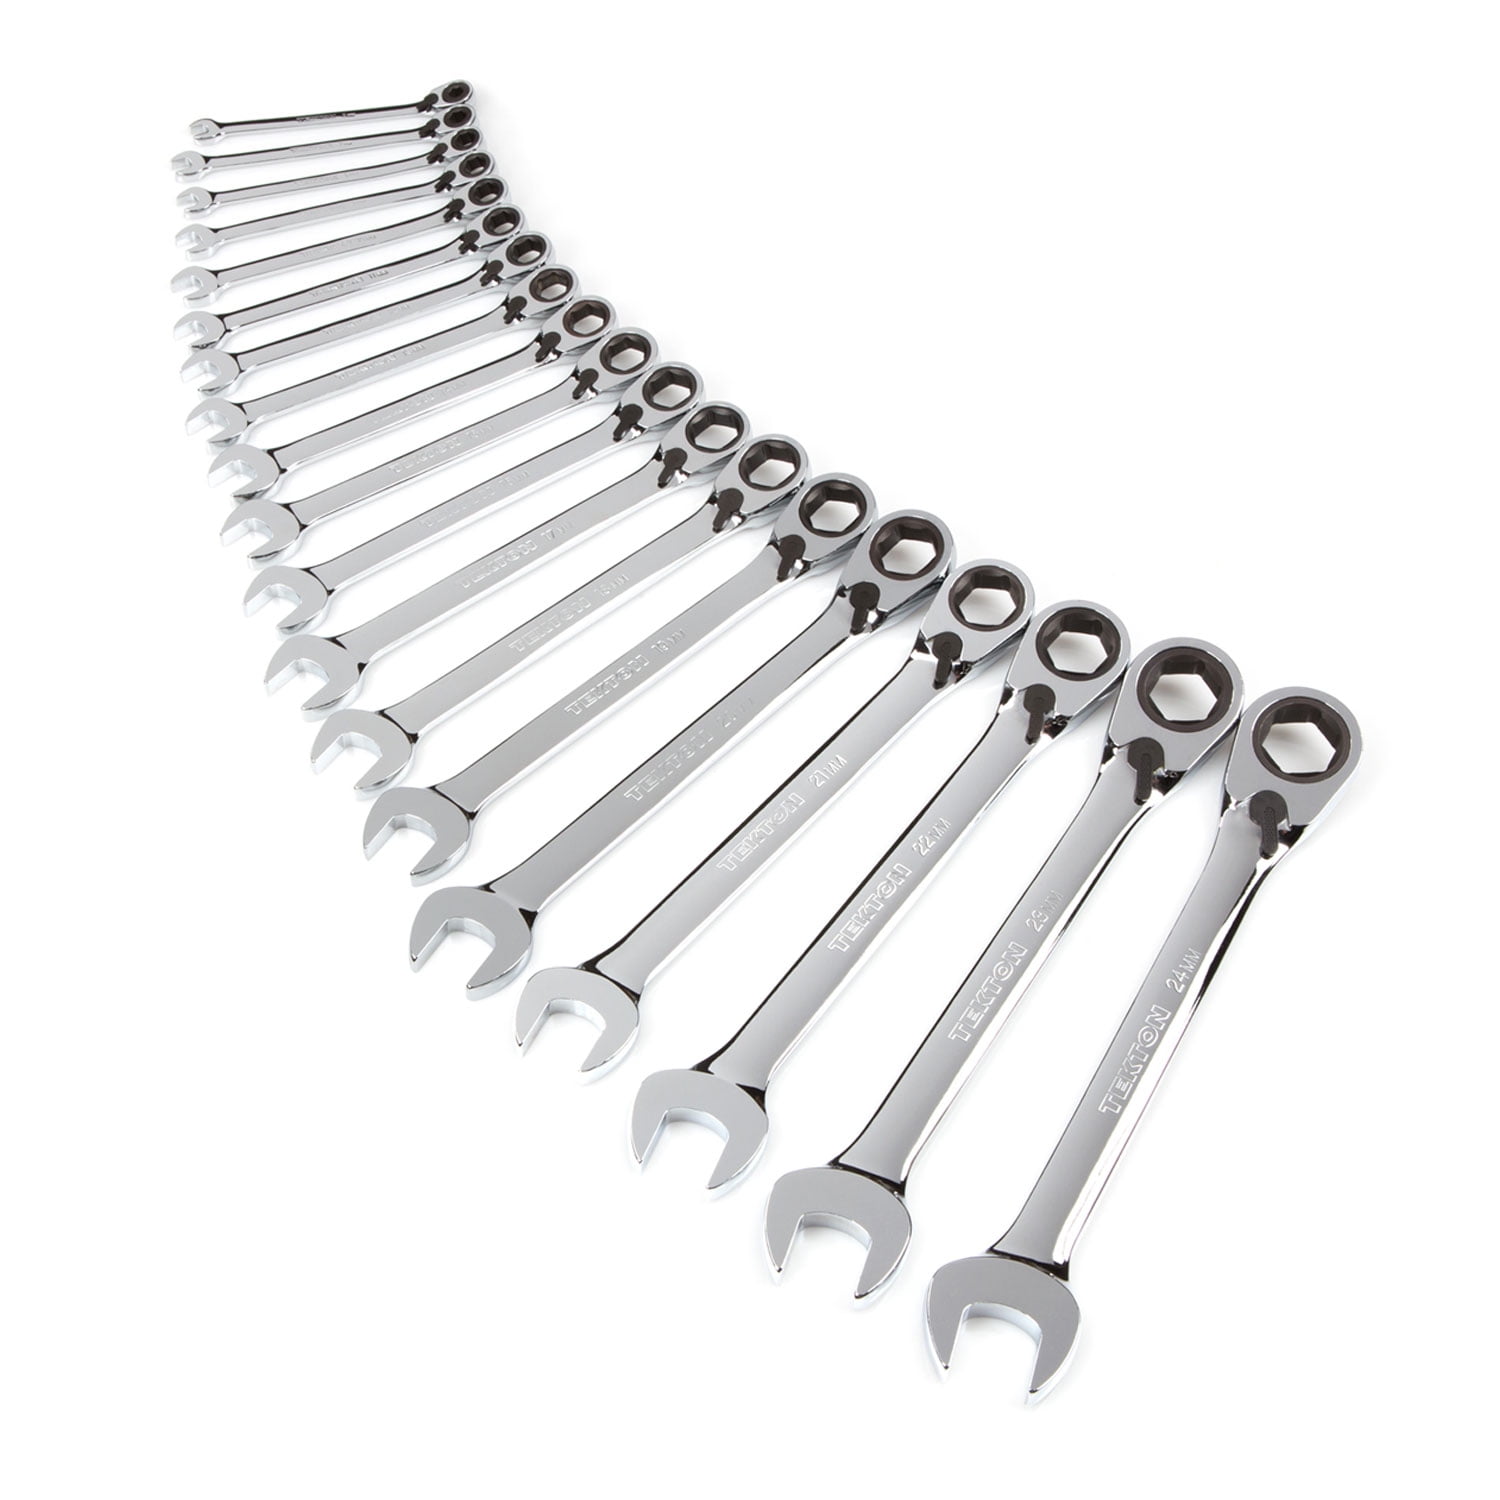 TEKTON WRN56197 Reversible Ratcheting Combo 6 to 24 mm Wrench Set